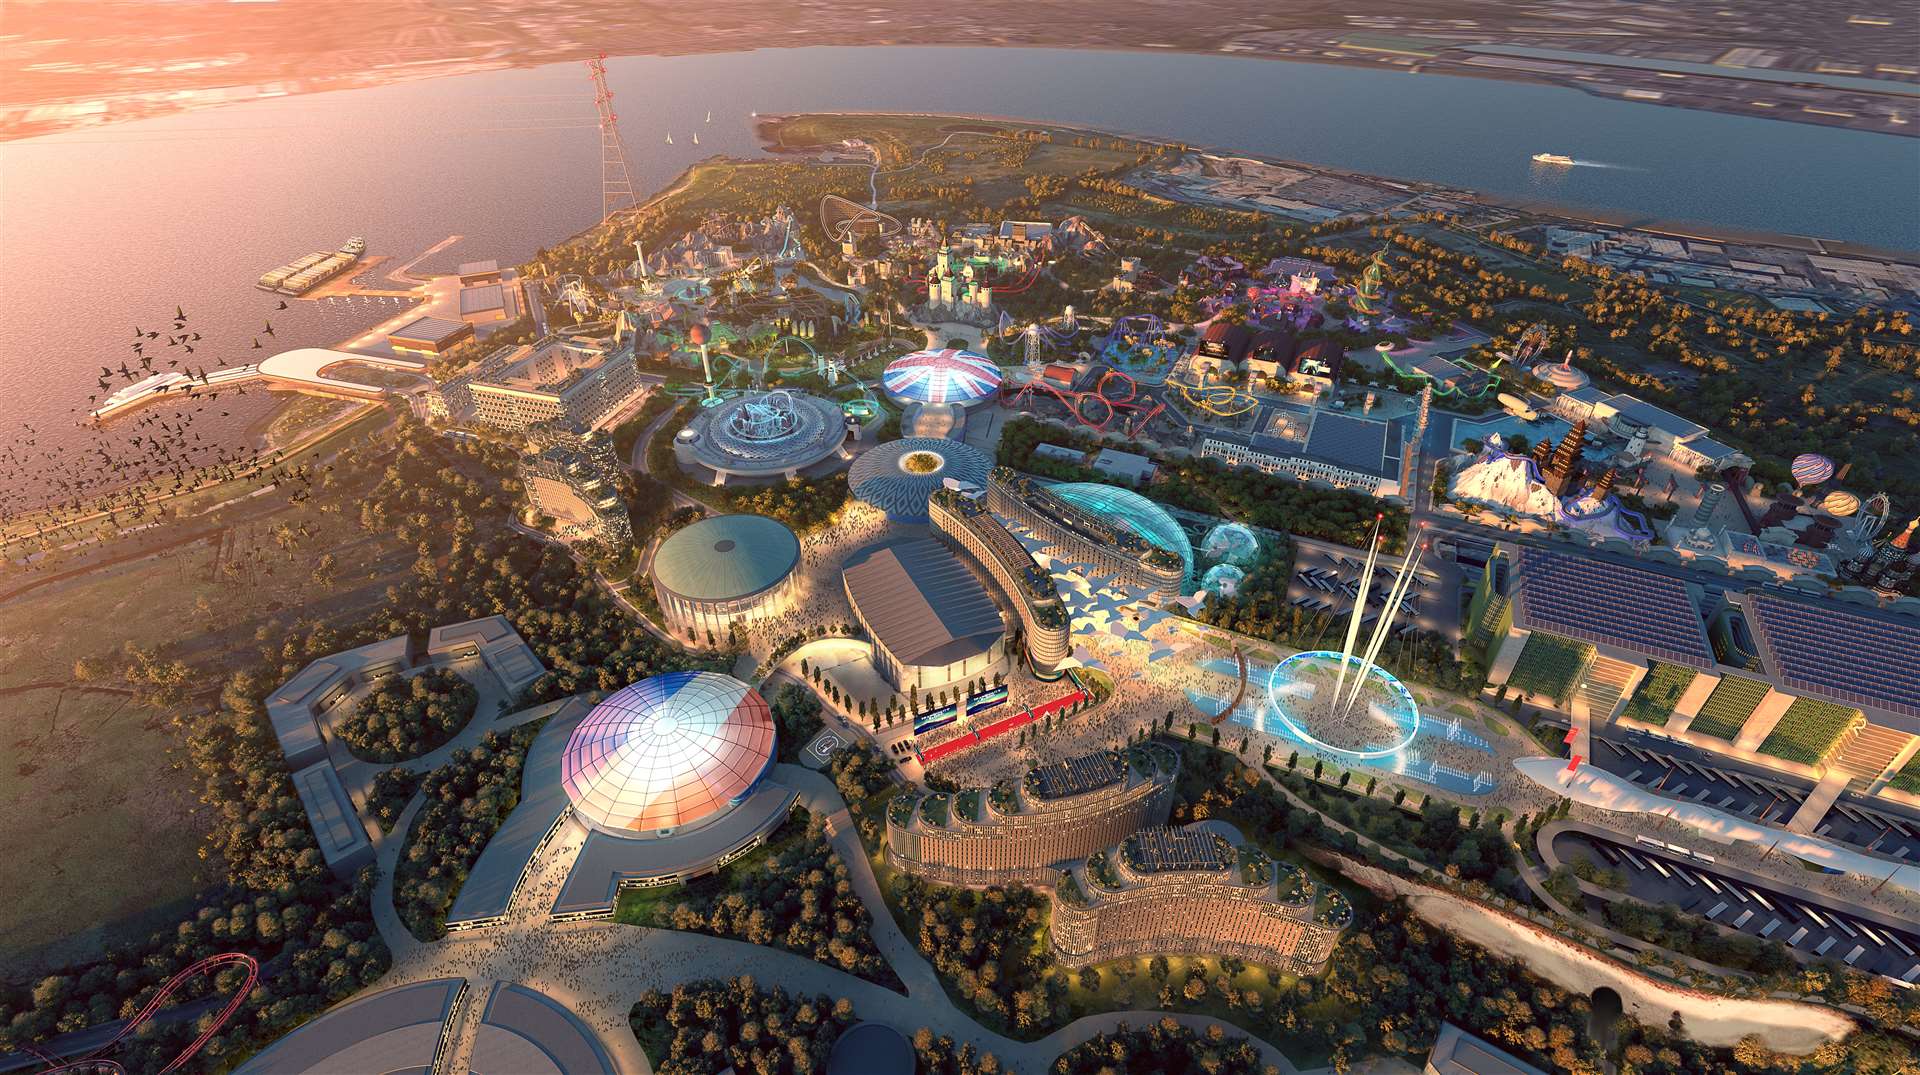 A new detailed impression of what the London Resort theme park will look like on the Swanscombe Peninsula which developers say will enhance the green space